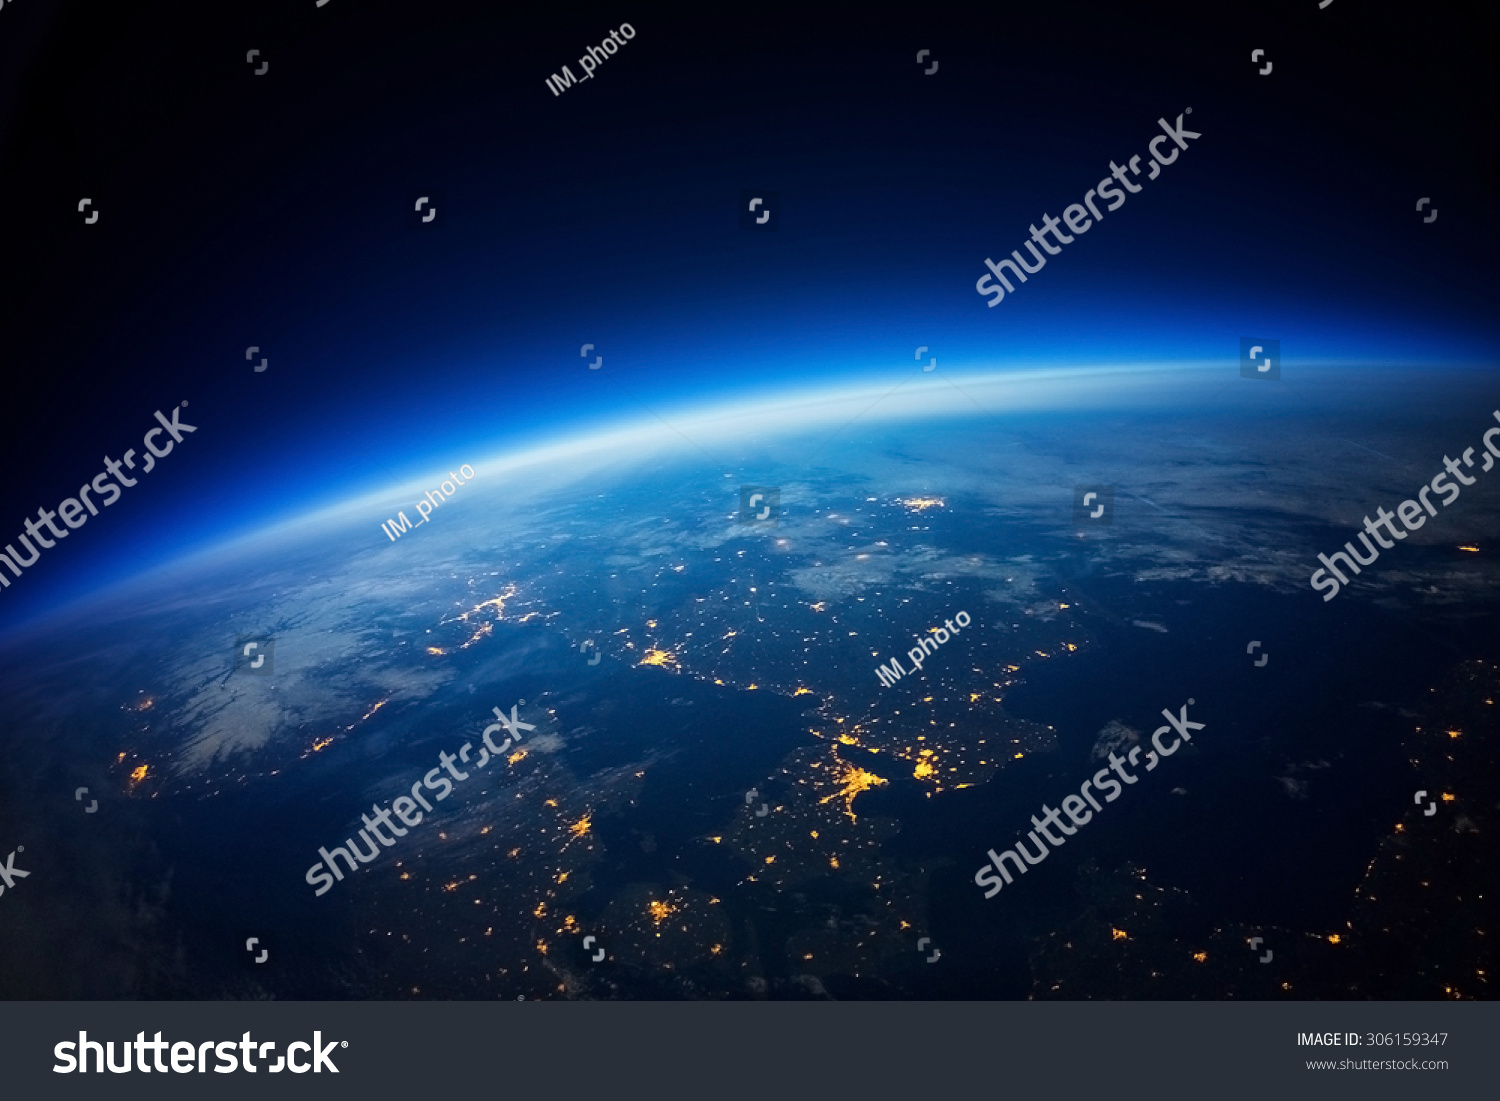 Near Space photography - 20km above ground / real photo (Elements of this image furnished by NASA) #306159347